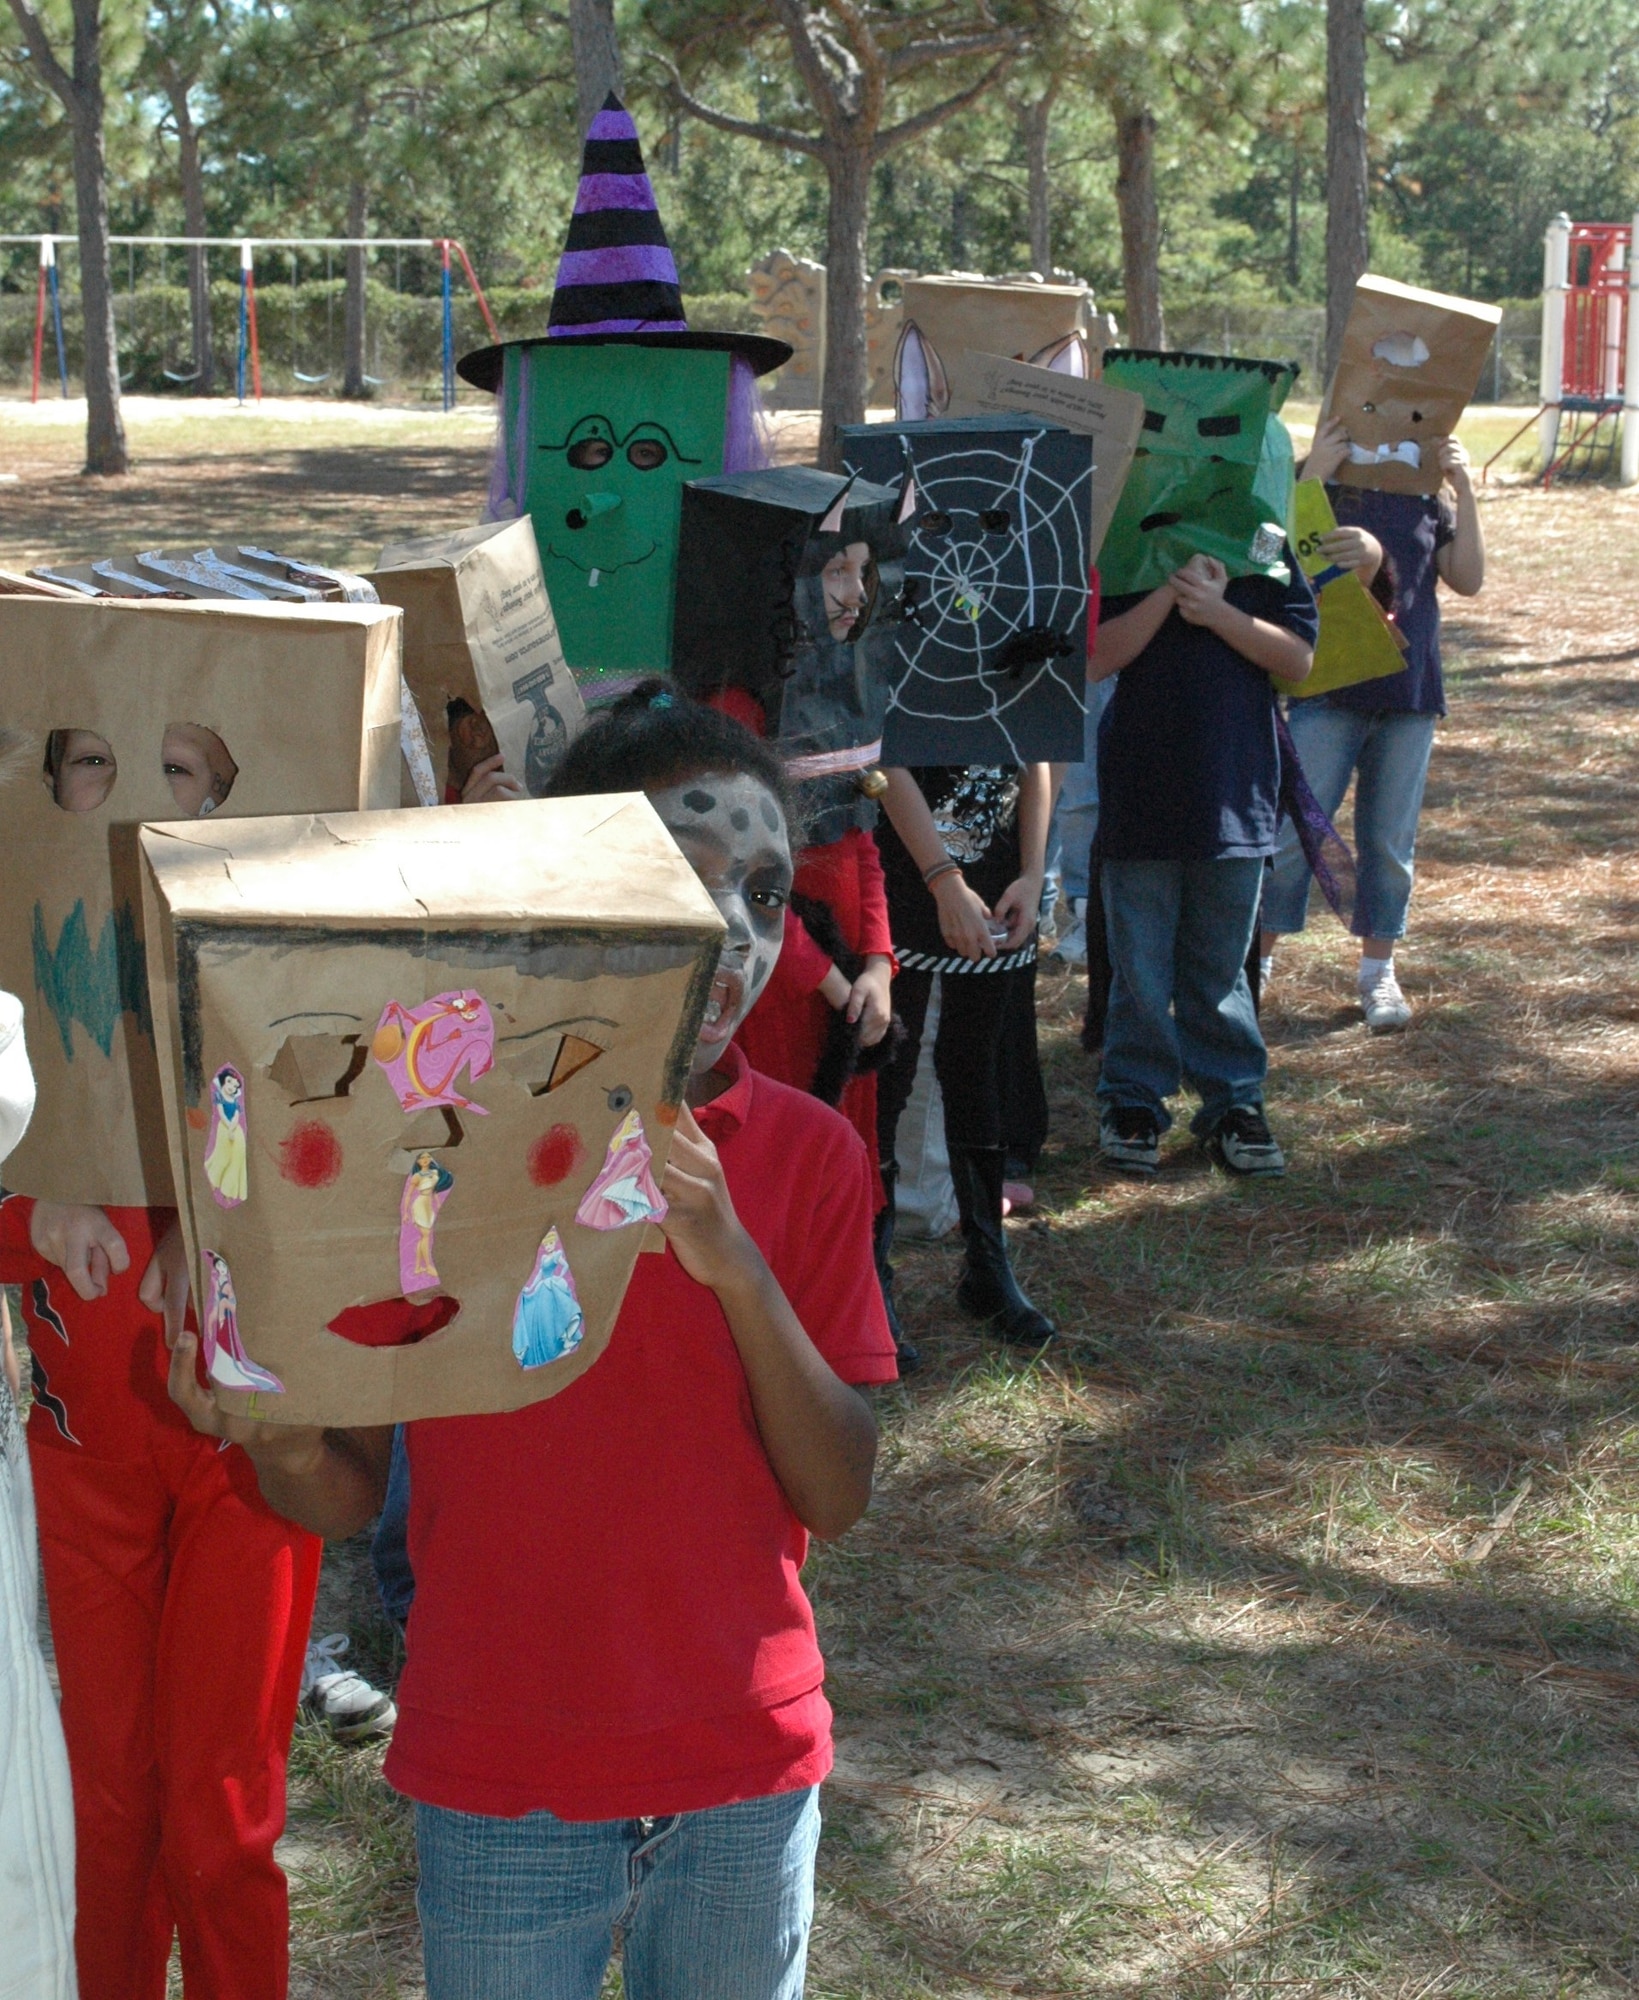 Tyndall Elementary School third graders parade around the school in their homemade paper bag masks to celebrate Halloween today. (U.S. Air Force photo by Airman 1st Class Veronica McMahon)